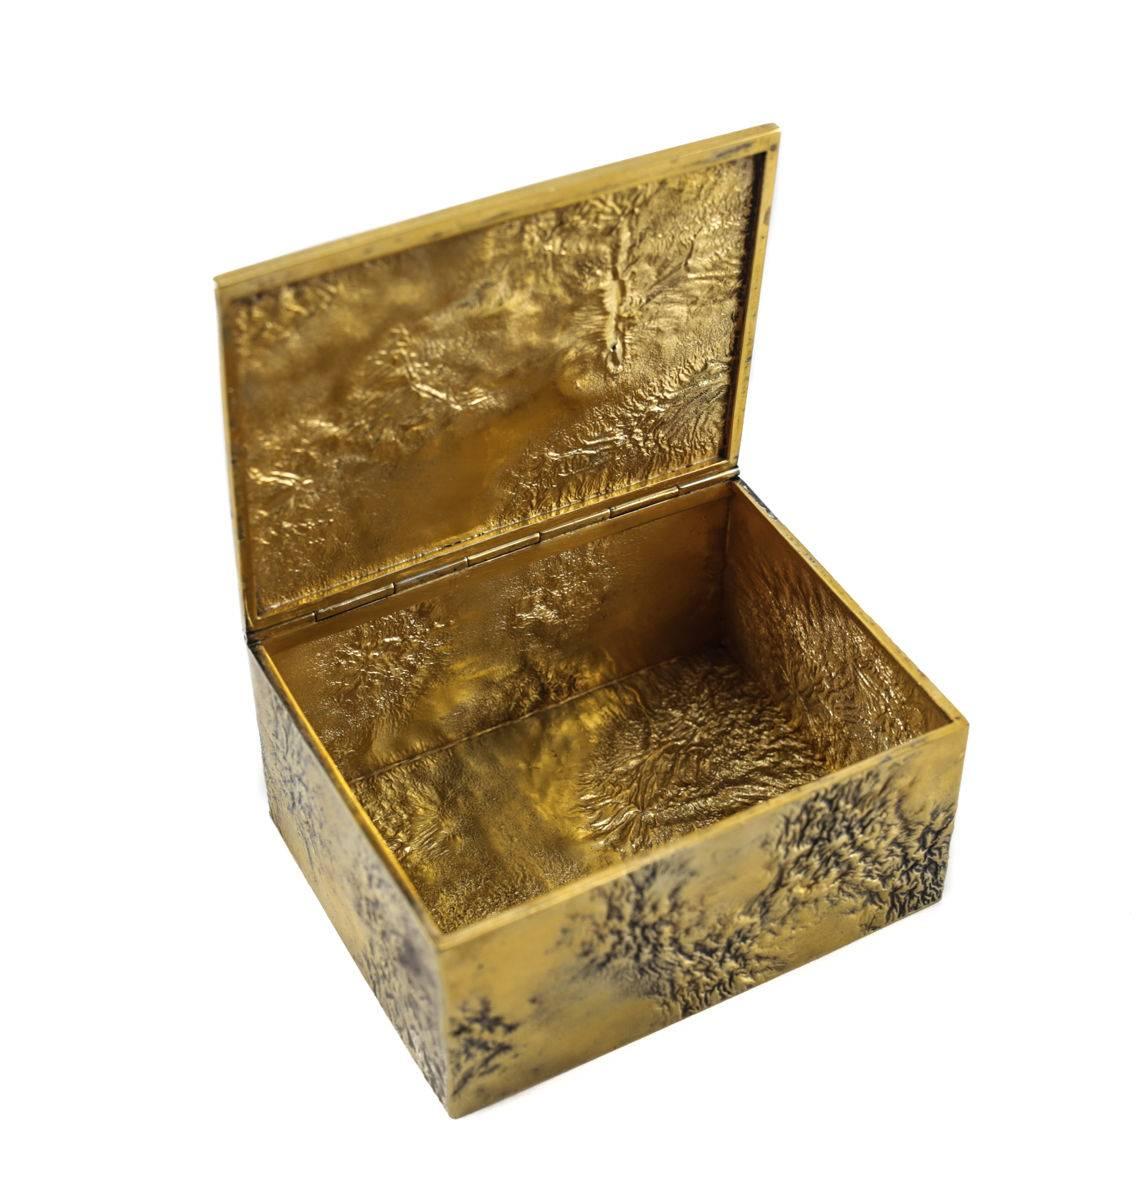 An Italian box constructed of solid sterling silver with an all-over gilt and textured finish with repousse terrains. 

With maker marks for Firenze silversmith Fallani Giusseppe, and retailer marks for Tiffany & Co.

Weighs 8 troy ounces.